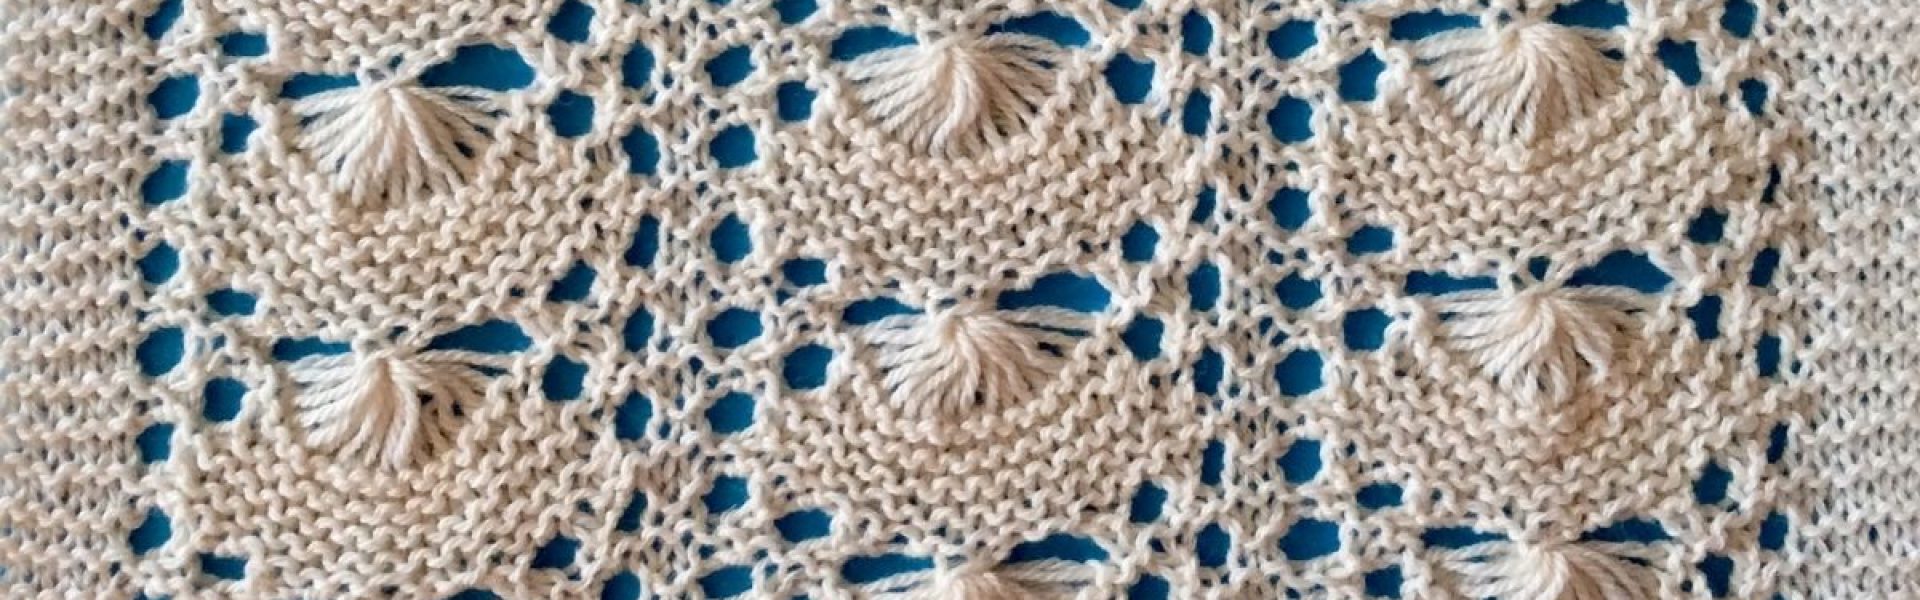 Knitting sample by Patricia McCarthy